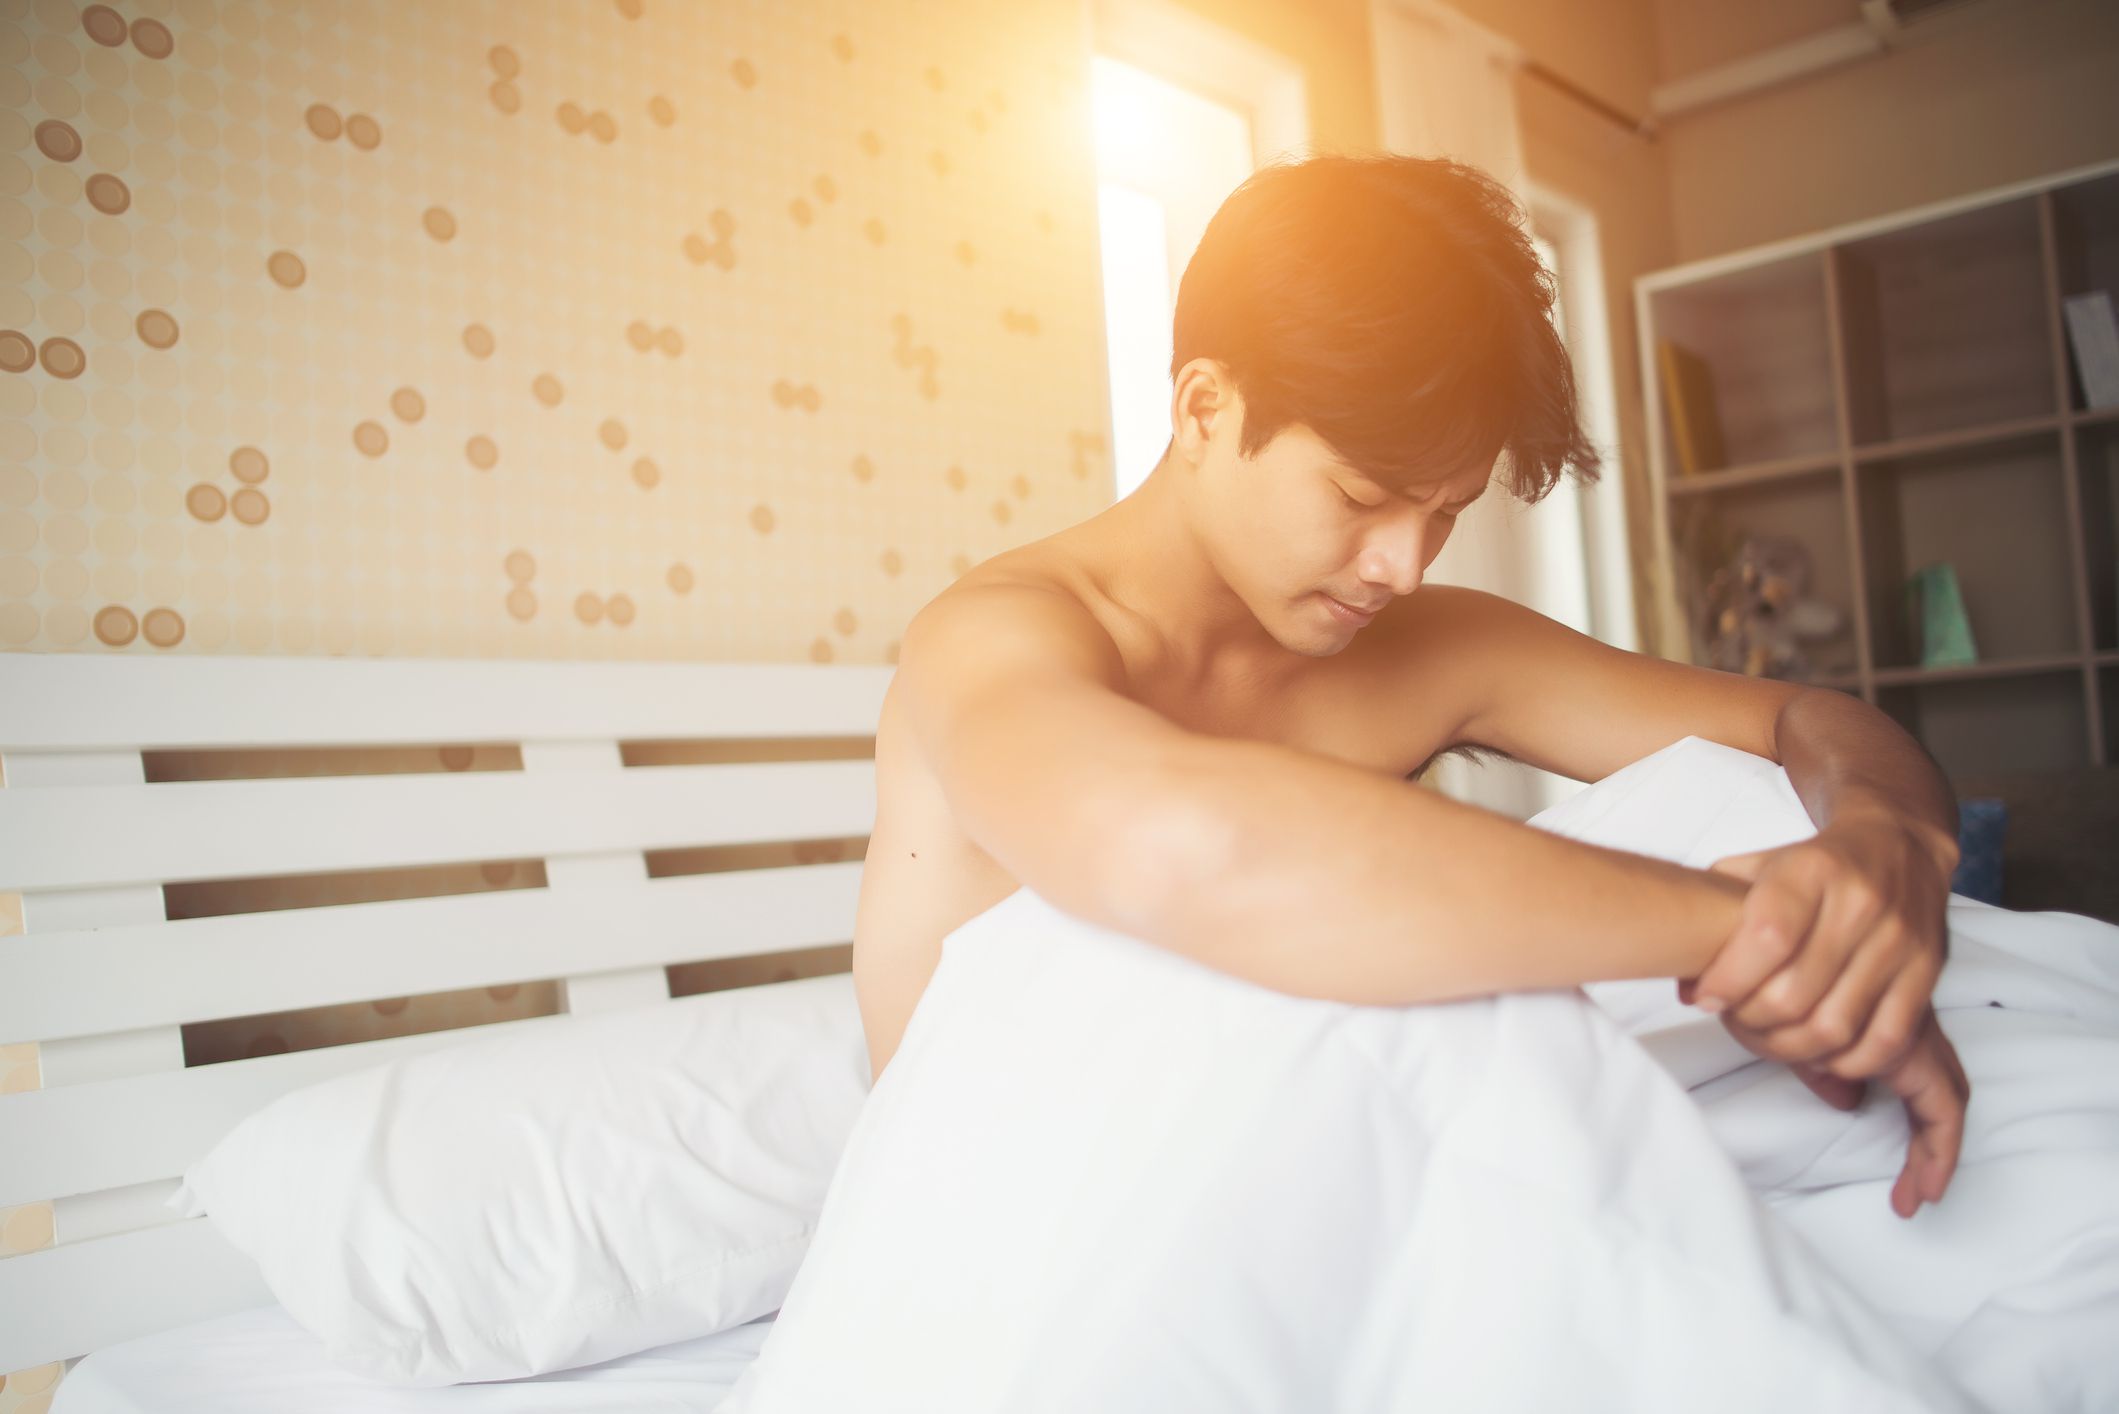 A shirtless young man siting on his bed at sunset